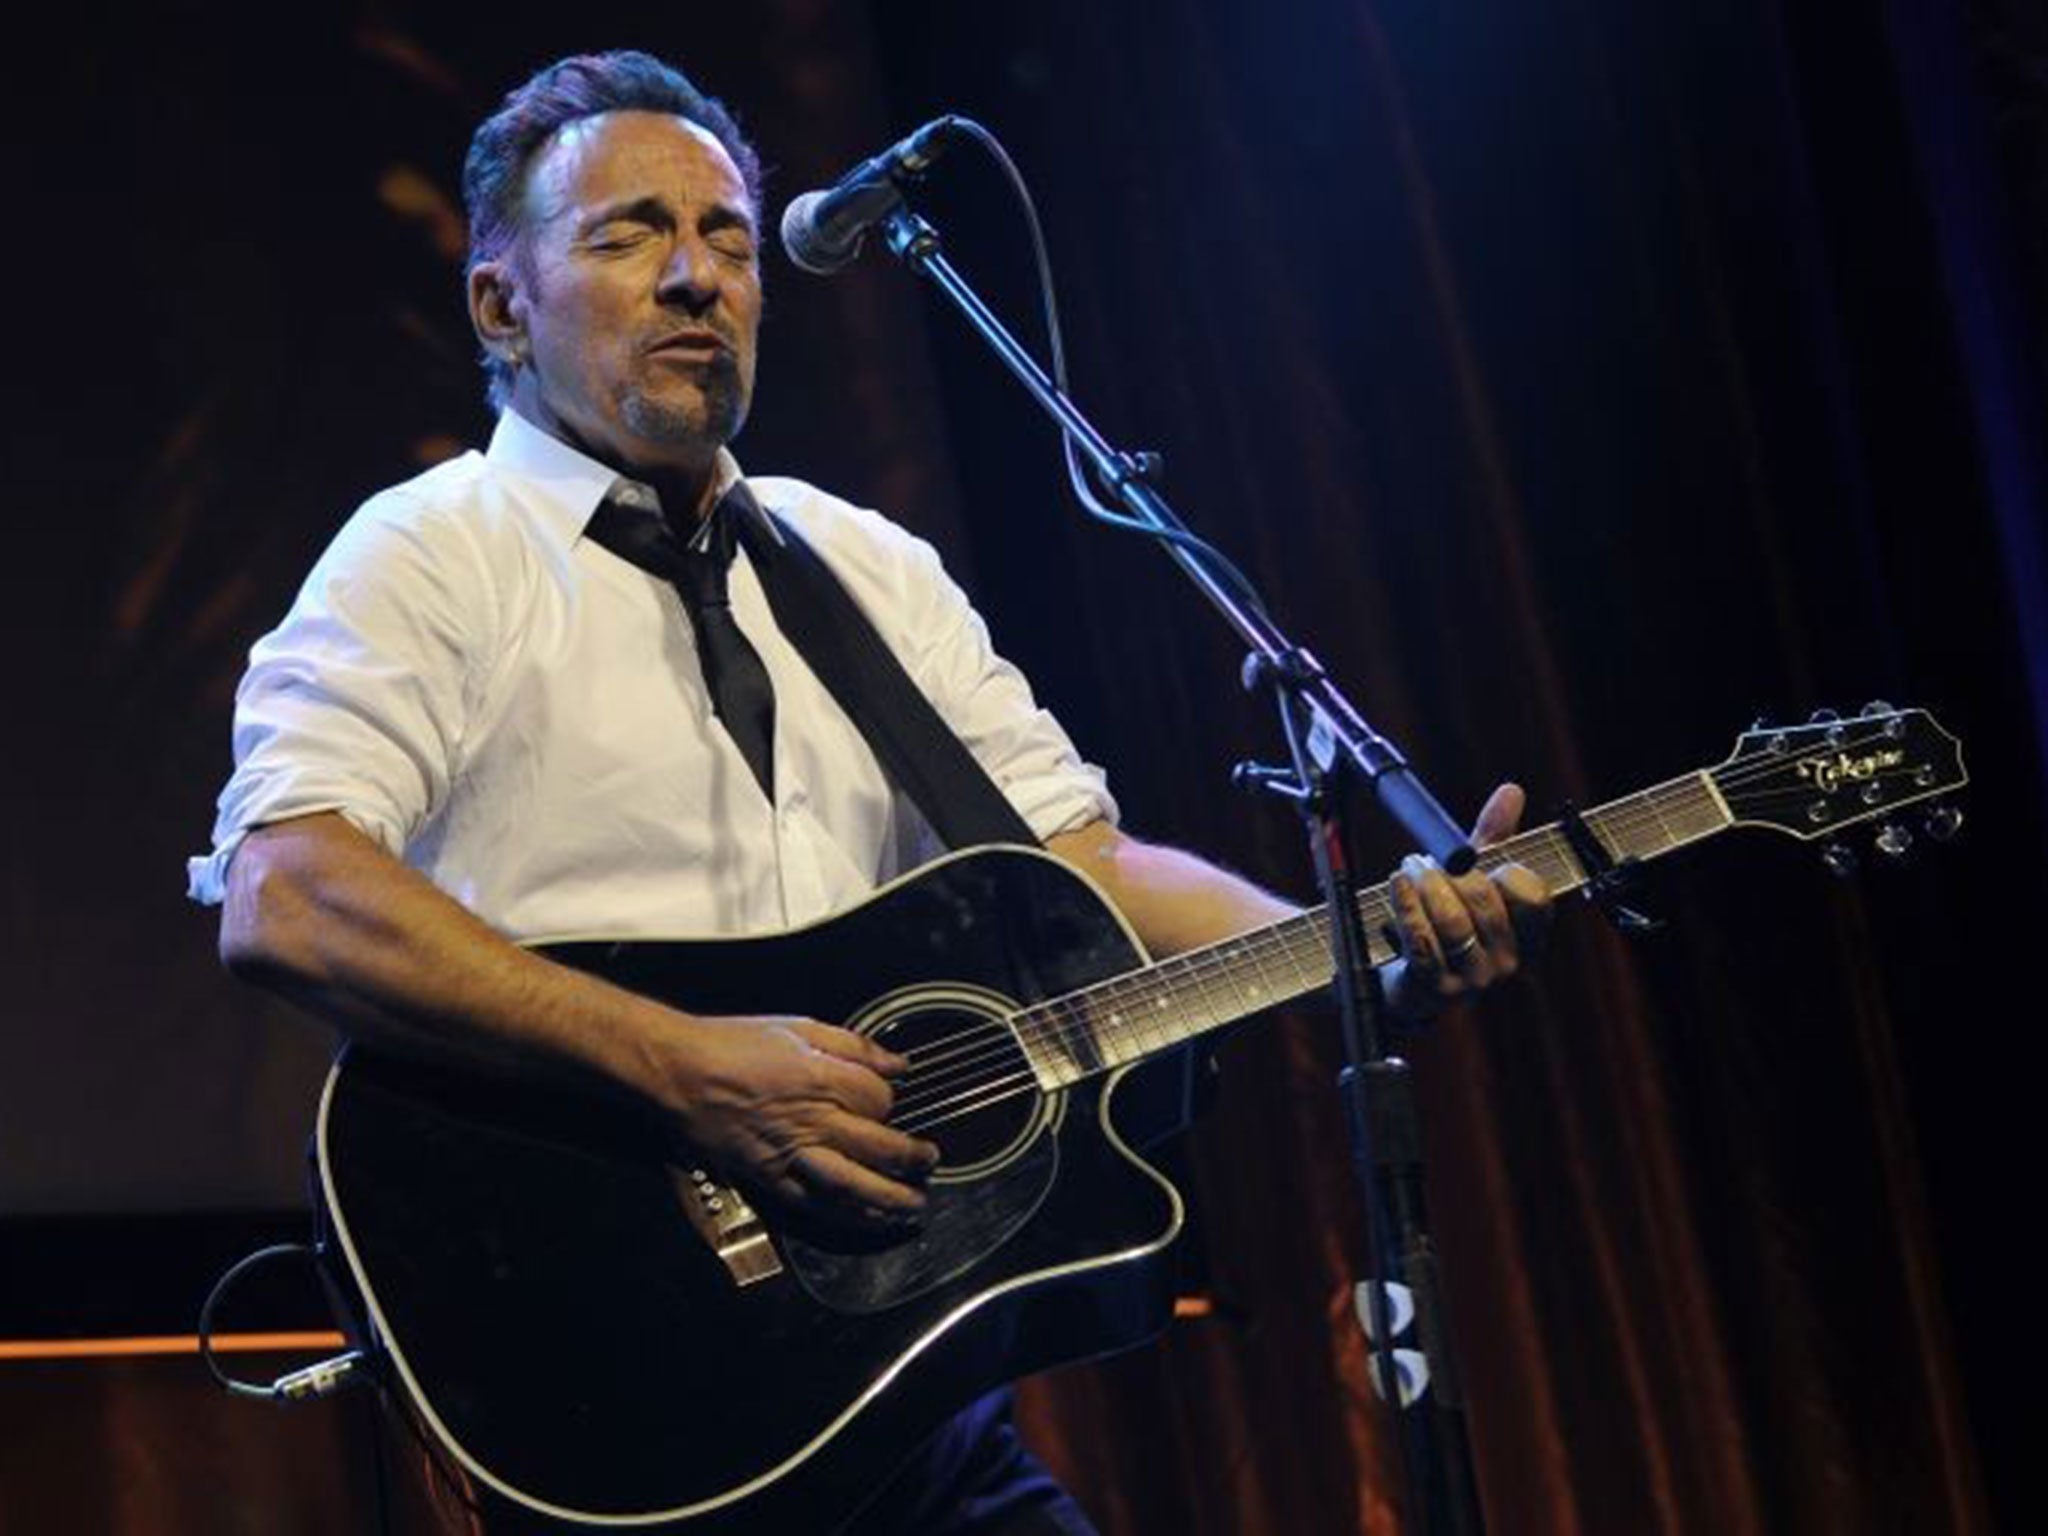 Outlaw Pete is based on an eight-minute ballad from Springsteen’s 2009 Working on a Dream album